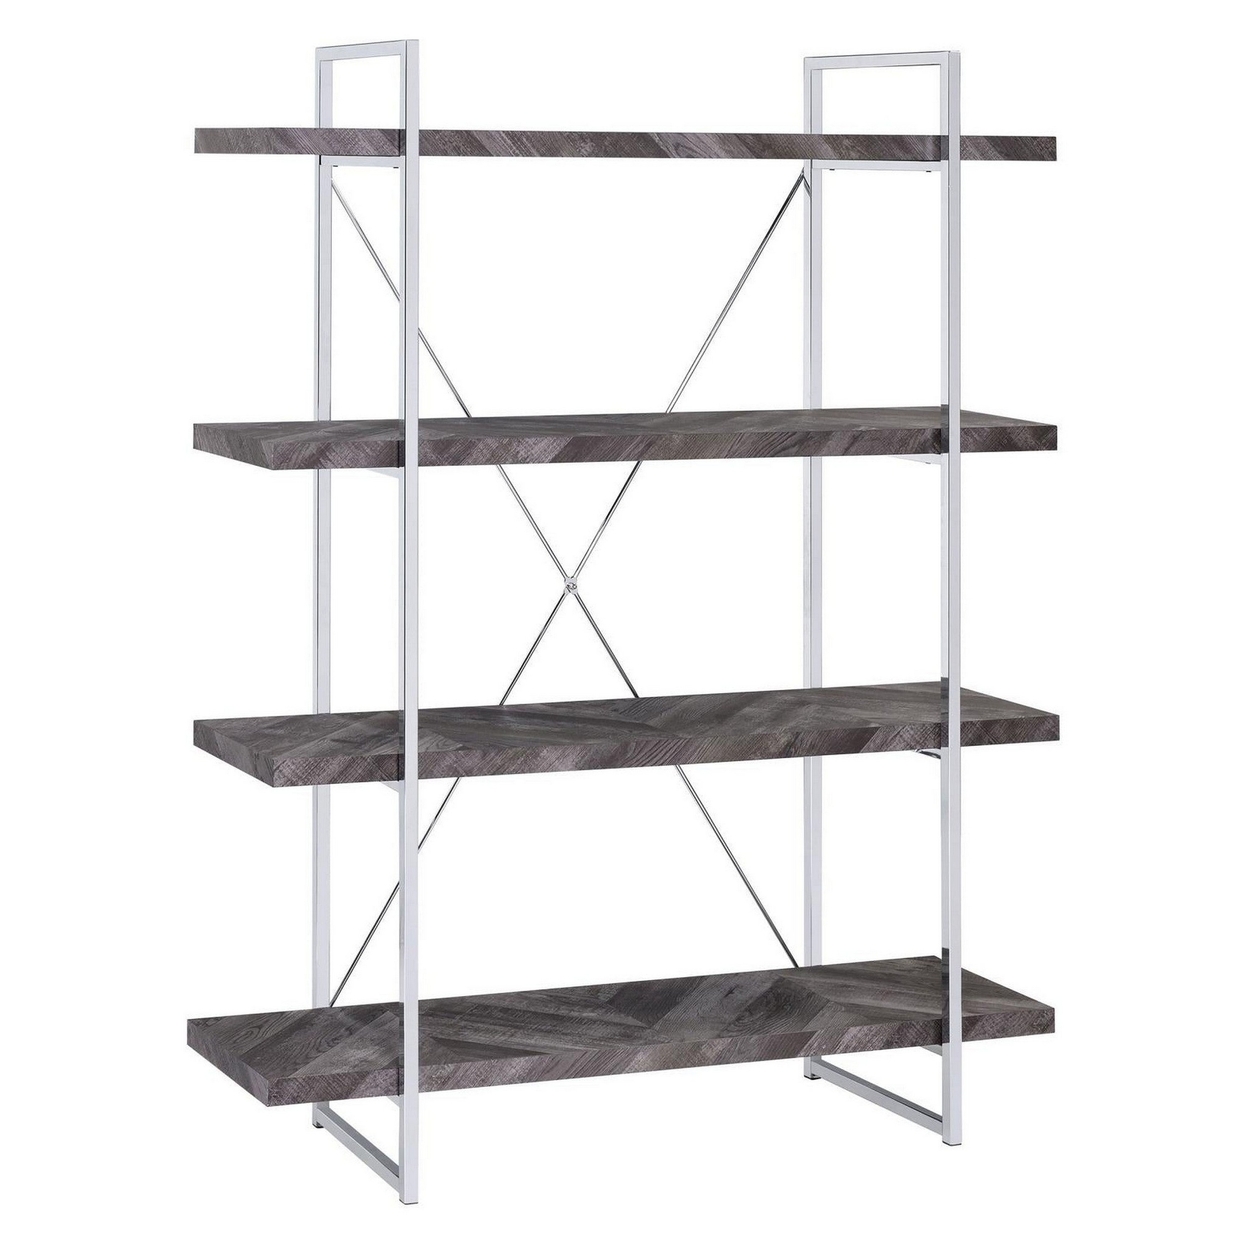 4 Shelf Wood And Metal Bookcase With X Shape Back Support, Gray And Silver- Saltoro Sherpi